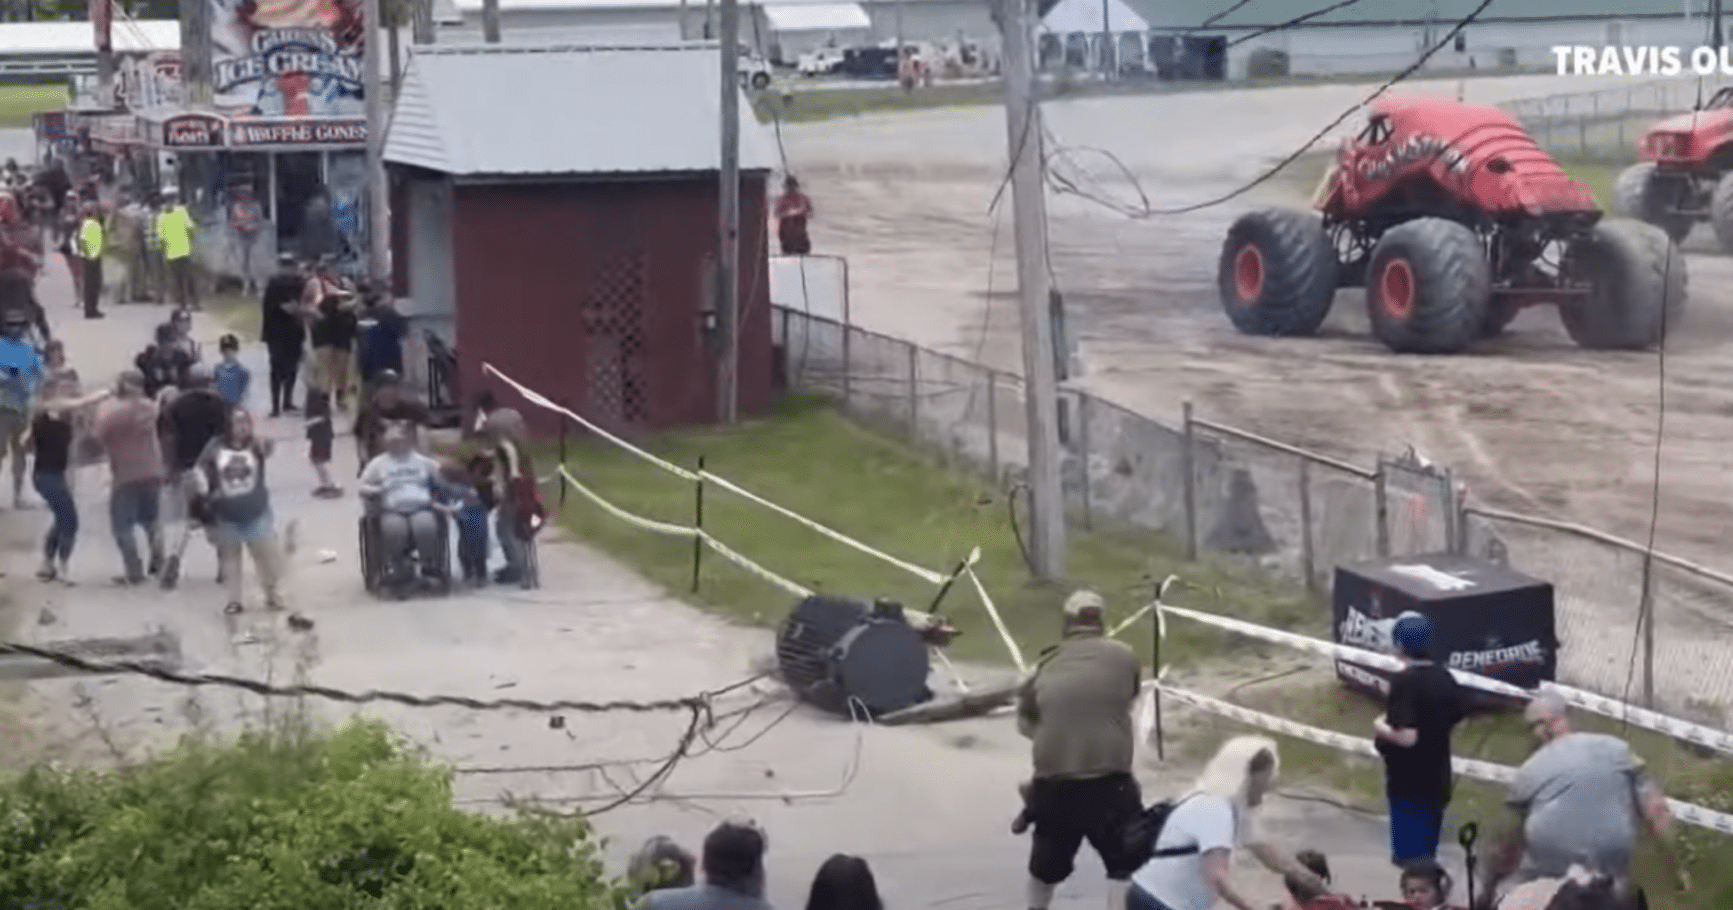 Unsafe Monster Truck Show in Maine Raises Concerns for Spectator Safety